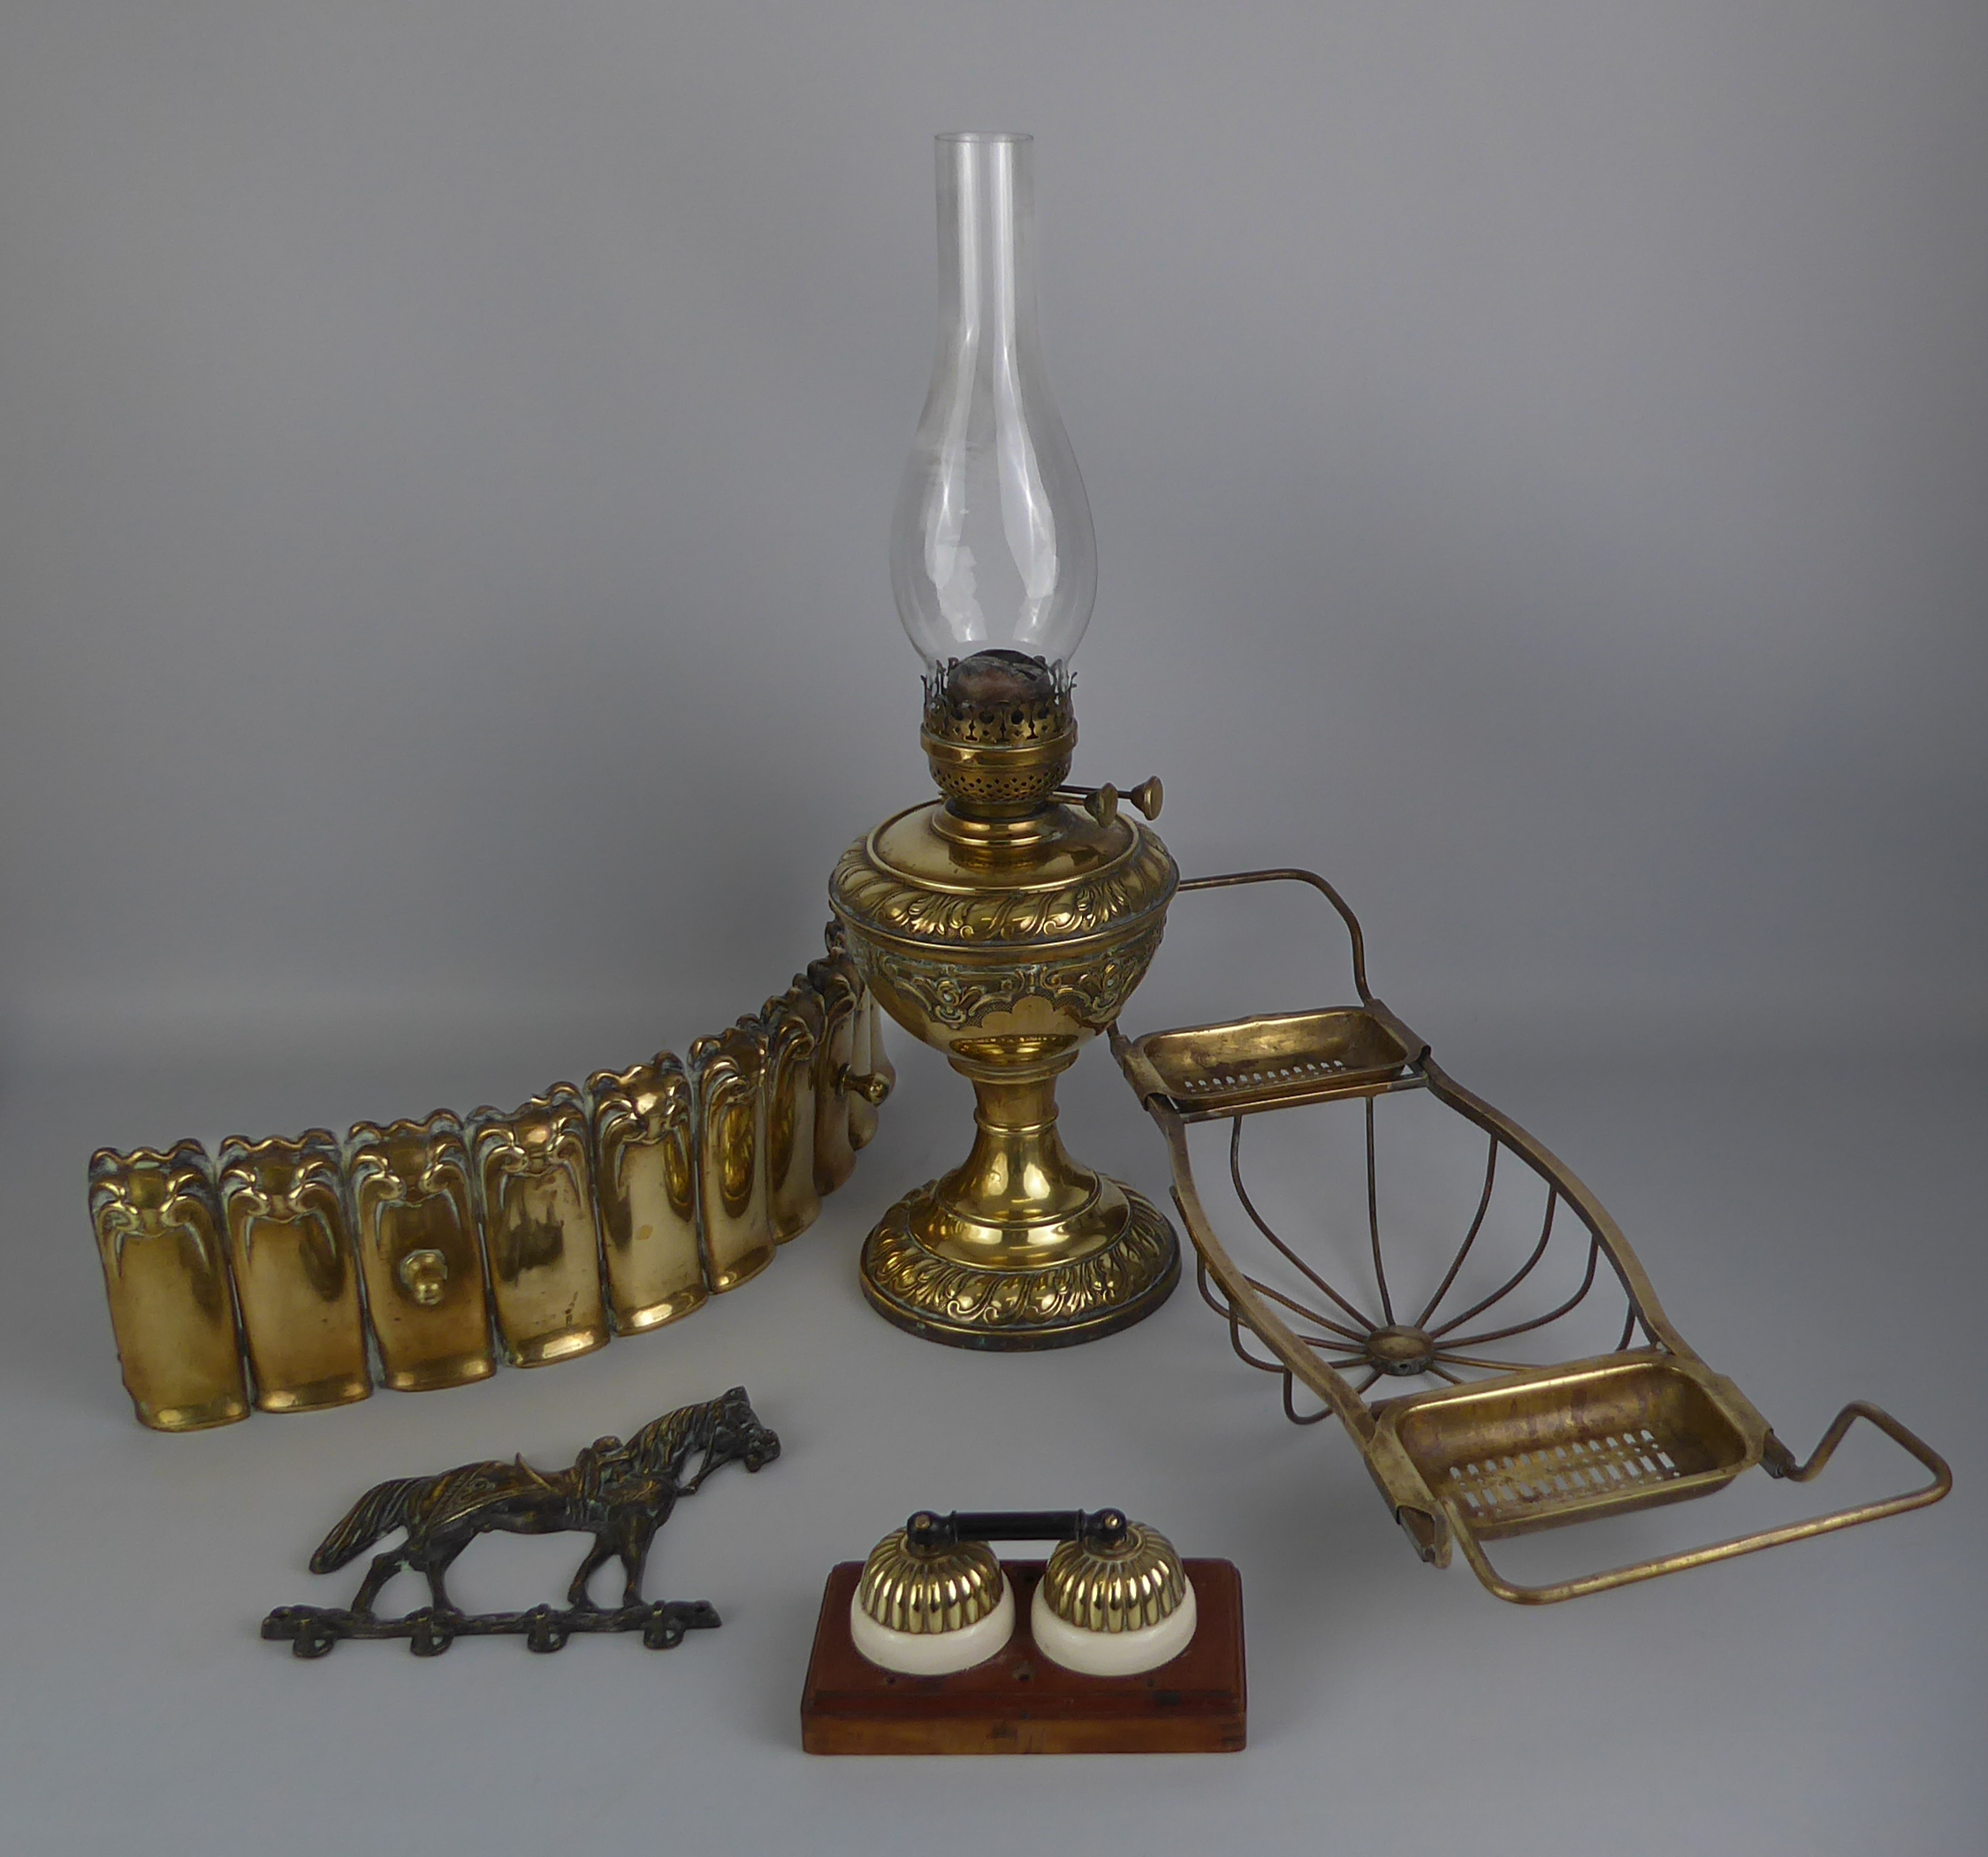 A small collection of brass ware - including an antique brass bath tub rack, 65 cm long, a/f; an